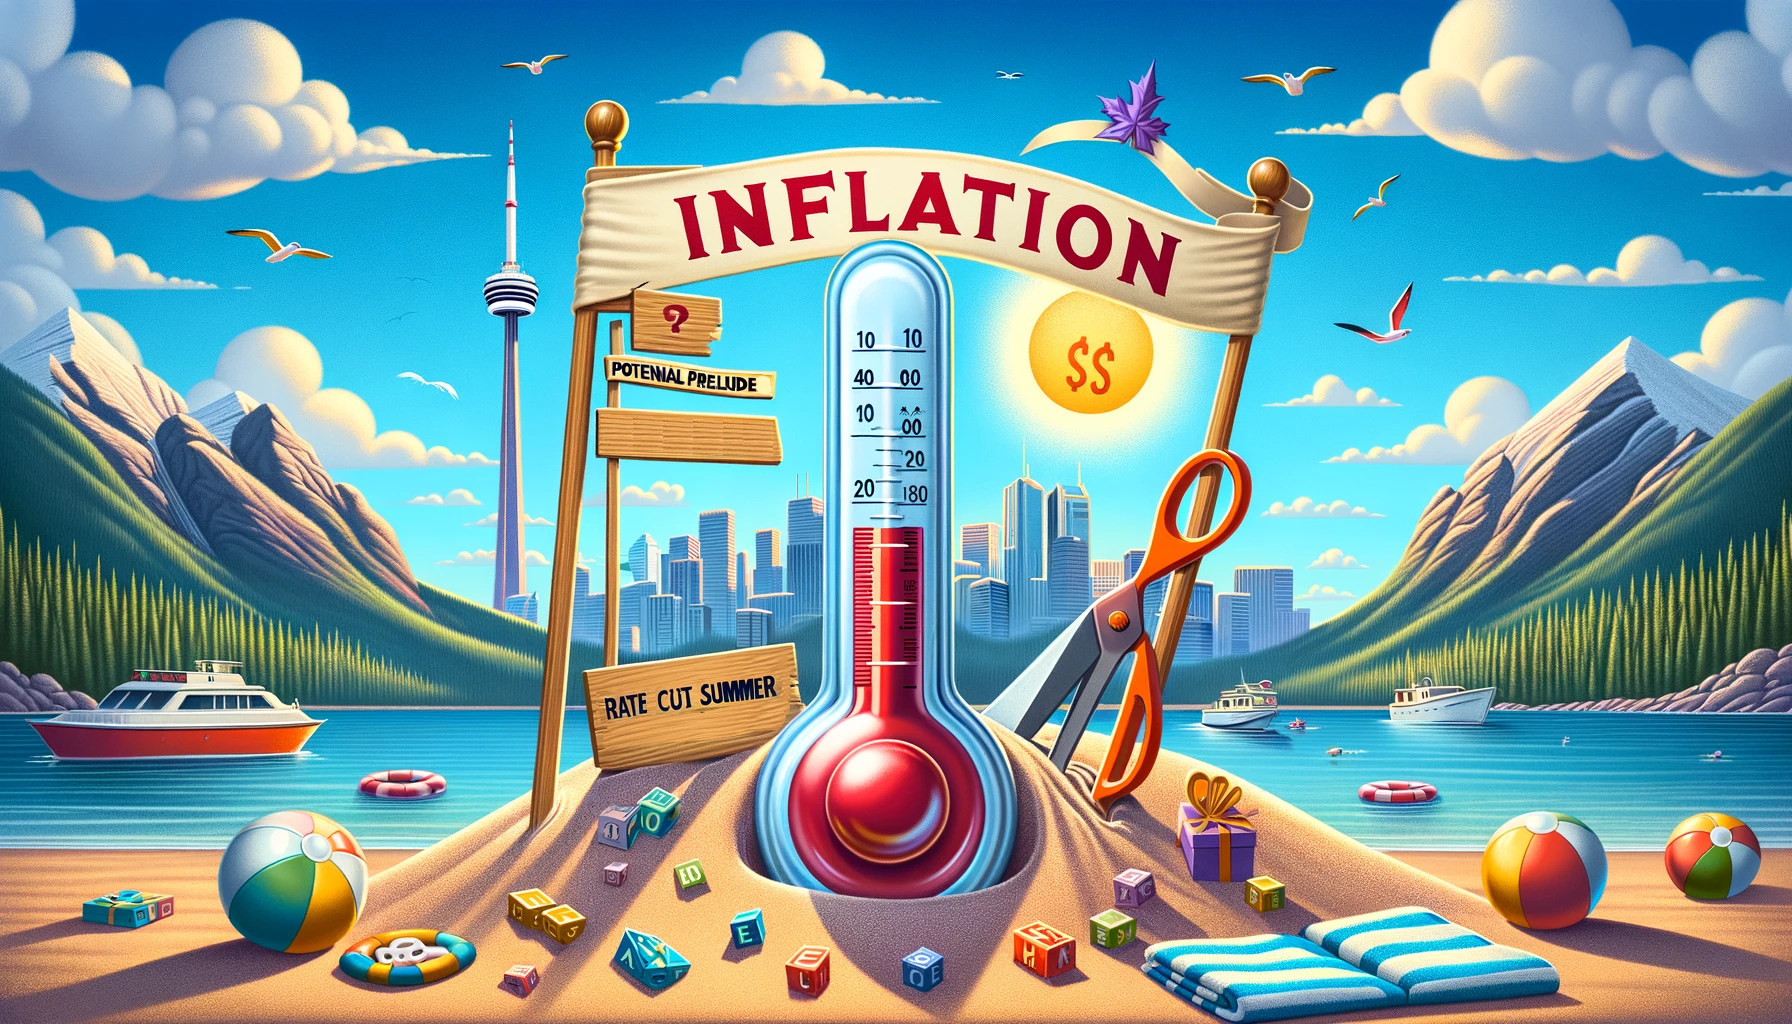 Canada's Inflation Surprise: Potential Prelude to a Rate Cut Summer